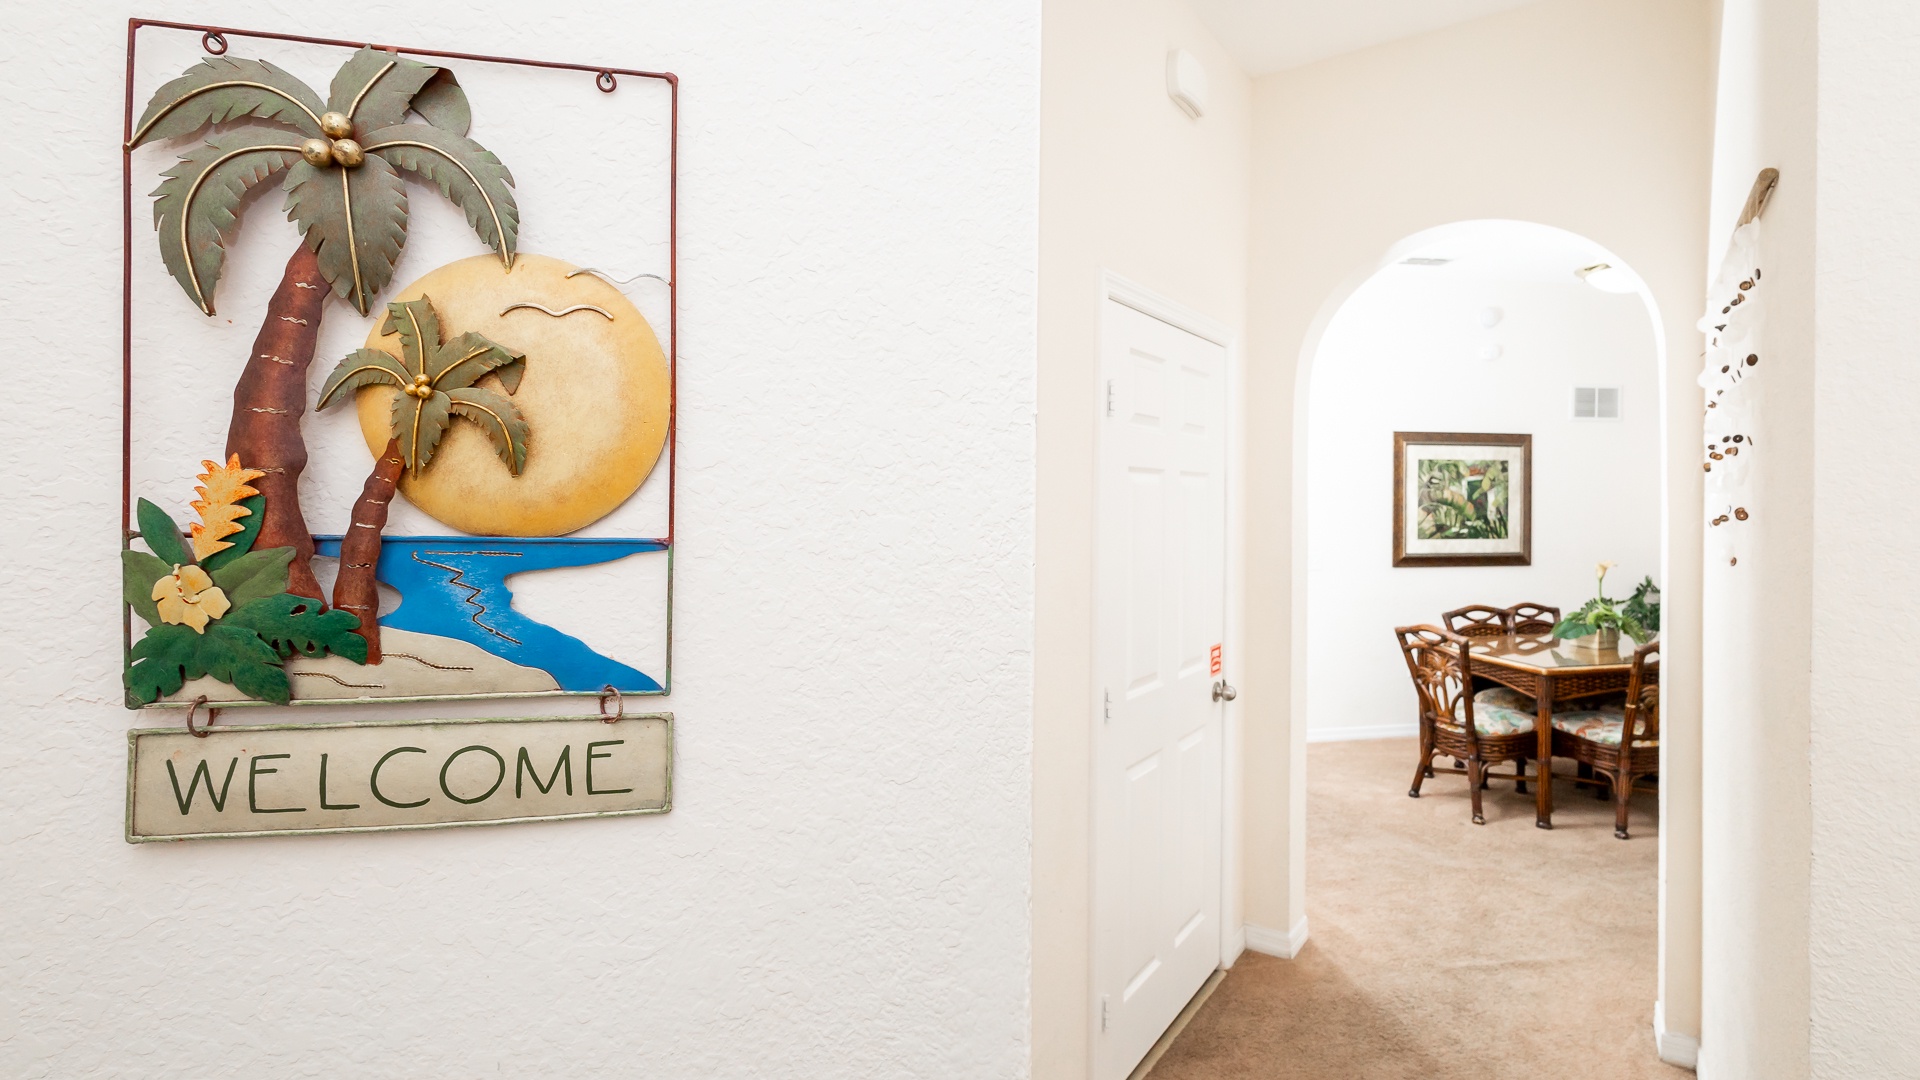 Welcome to Sunset Serenity at Caribe Cove Resort!